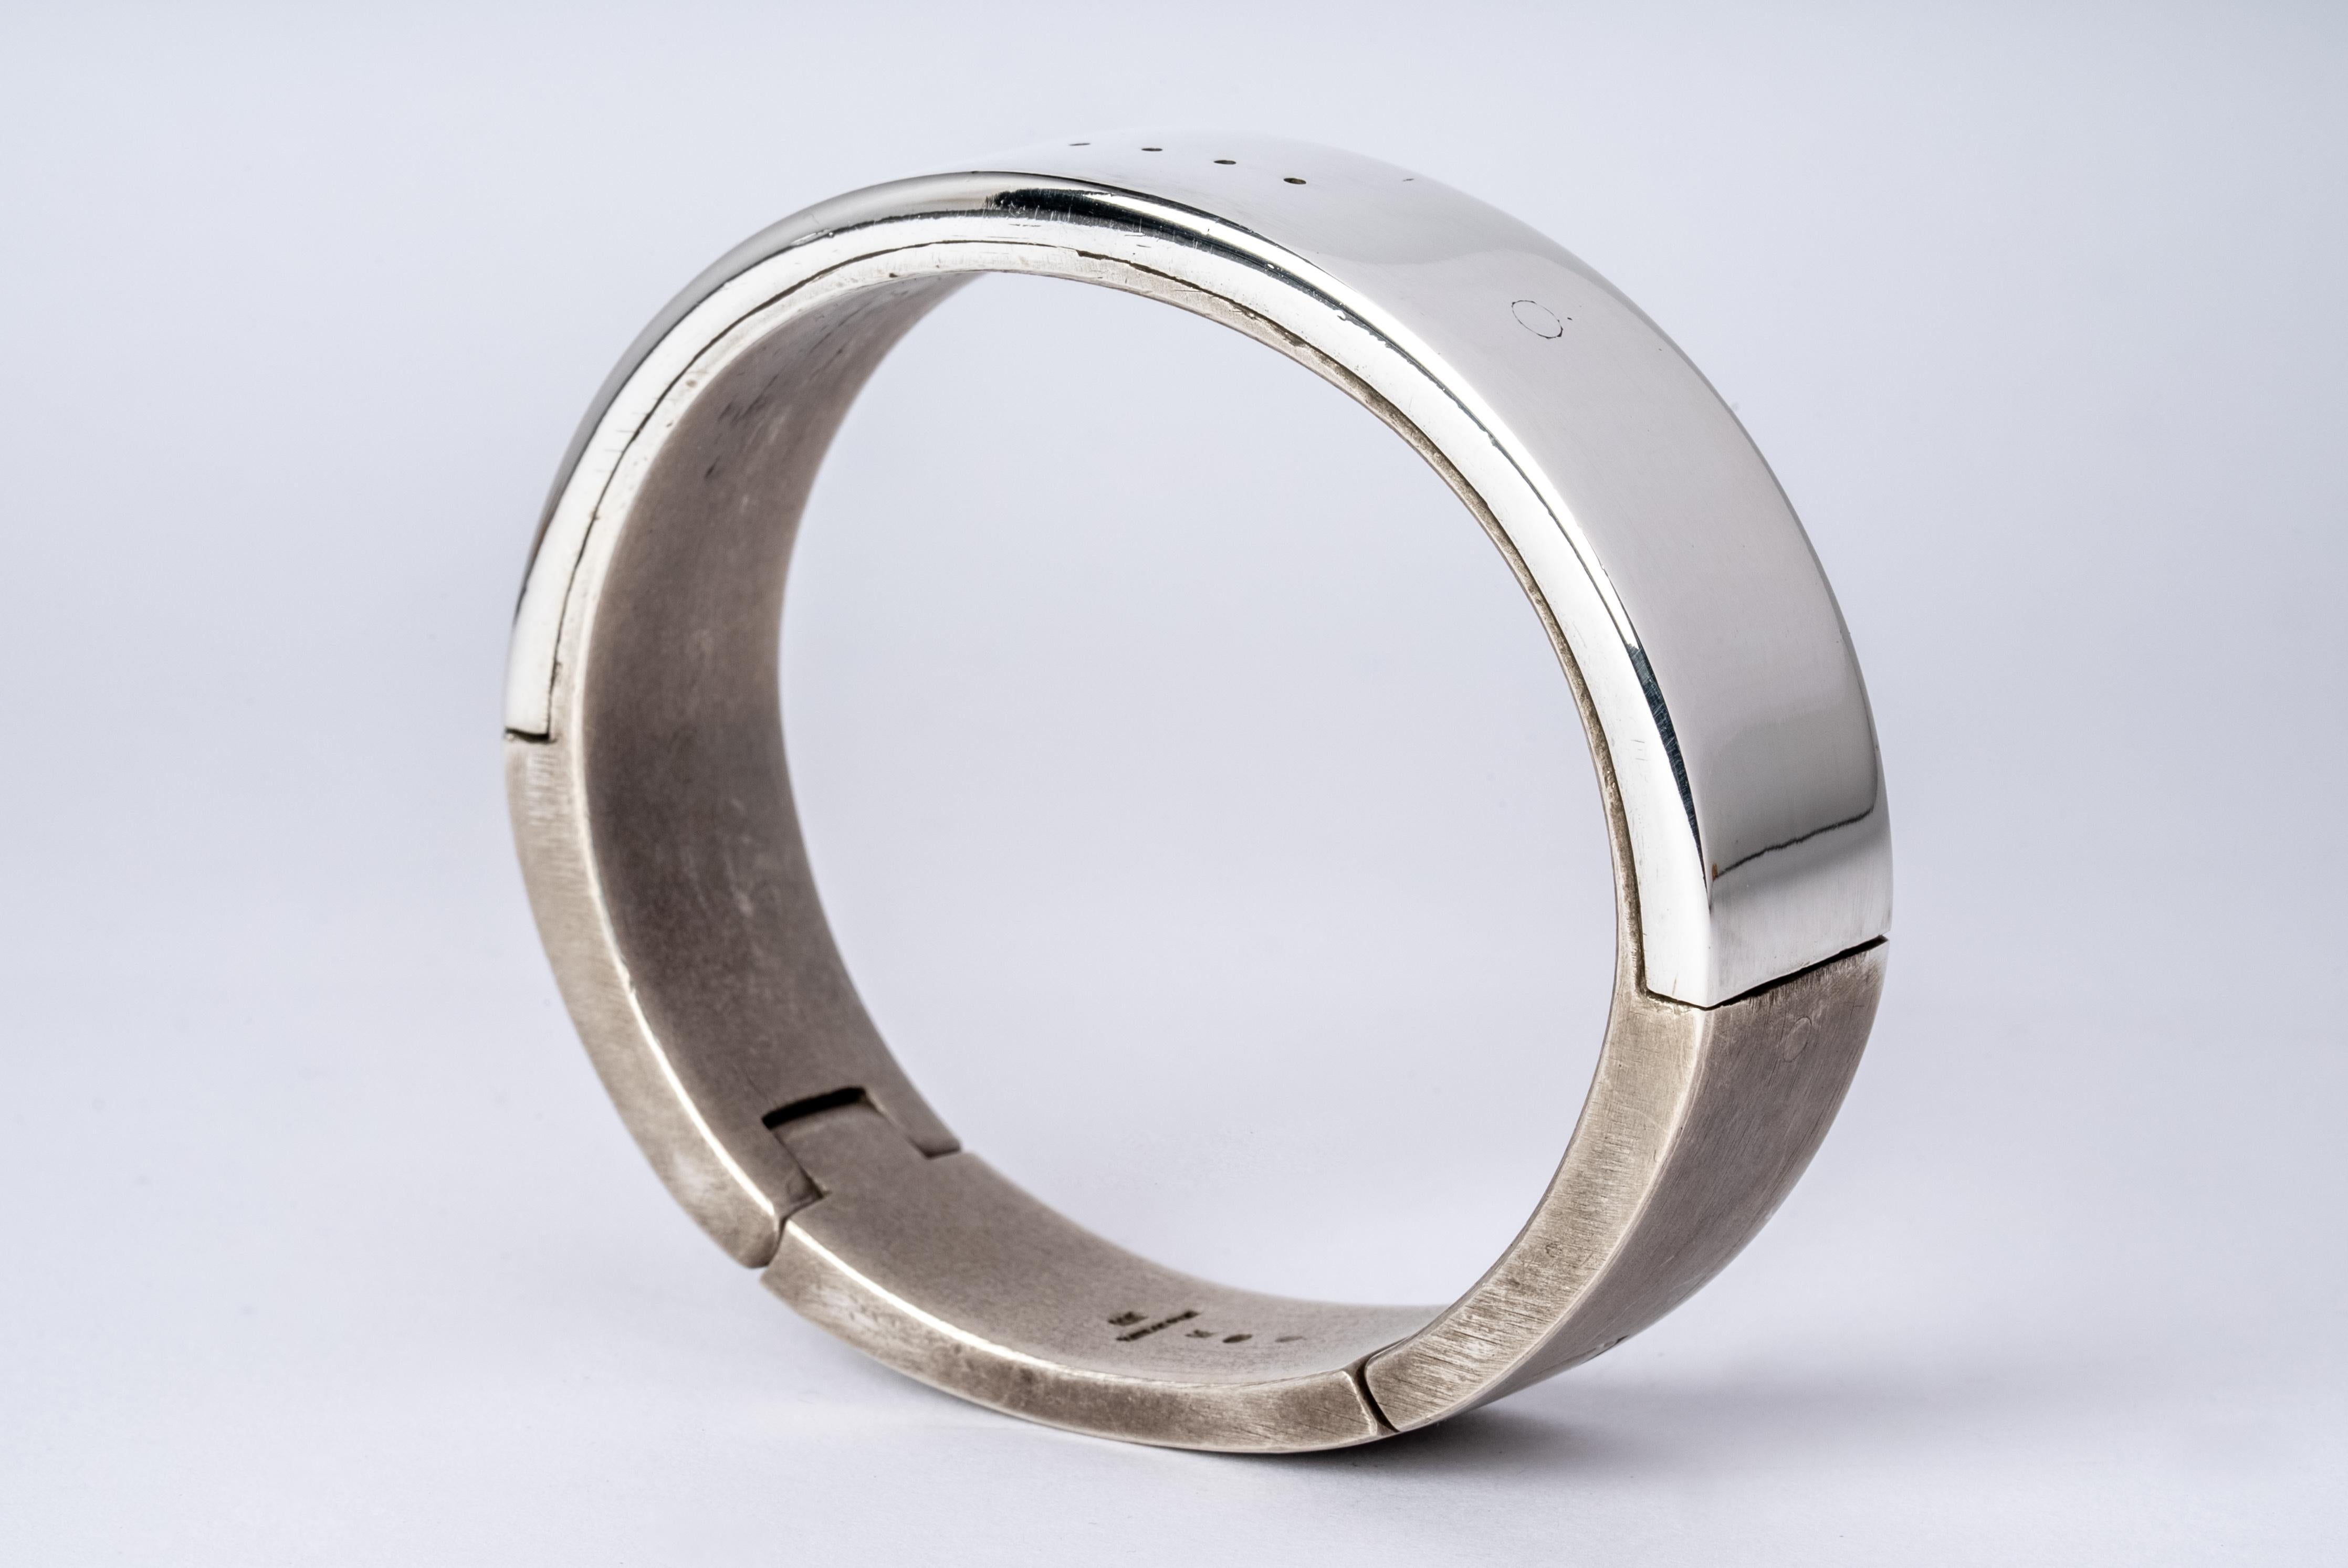 Bracelet in sterling silver. The Sistema series expresses the core principle of P/4 which is modularity. The 